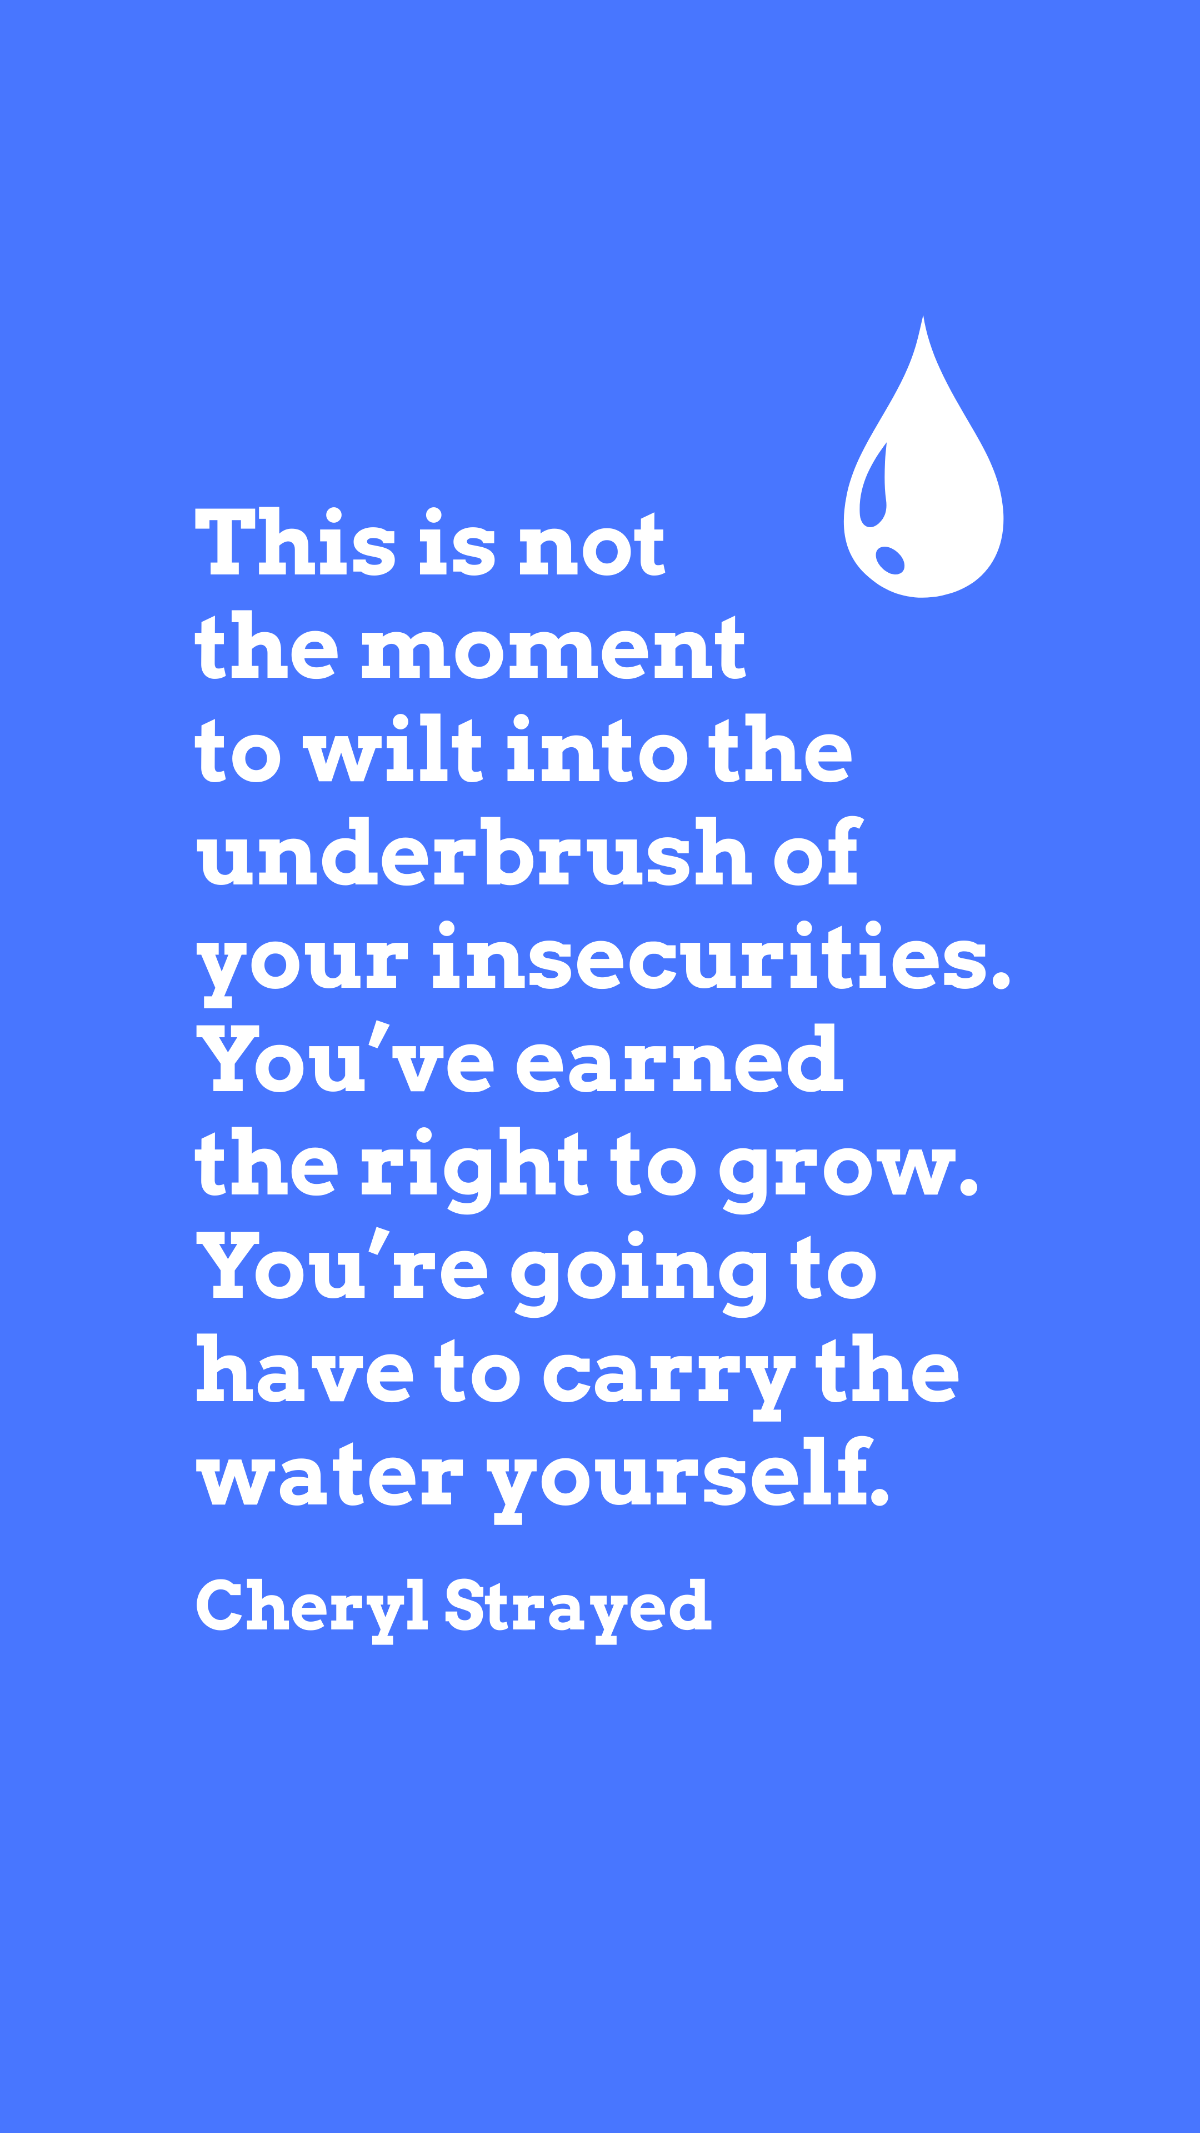 Cheryl Strayed - This is not the moment to wilt into the underbrush of your insecurities. You’ve earned the right to grow. You’re going to have to carry the water yourself. Template